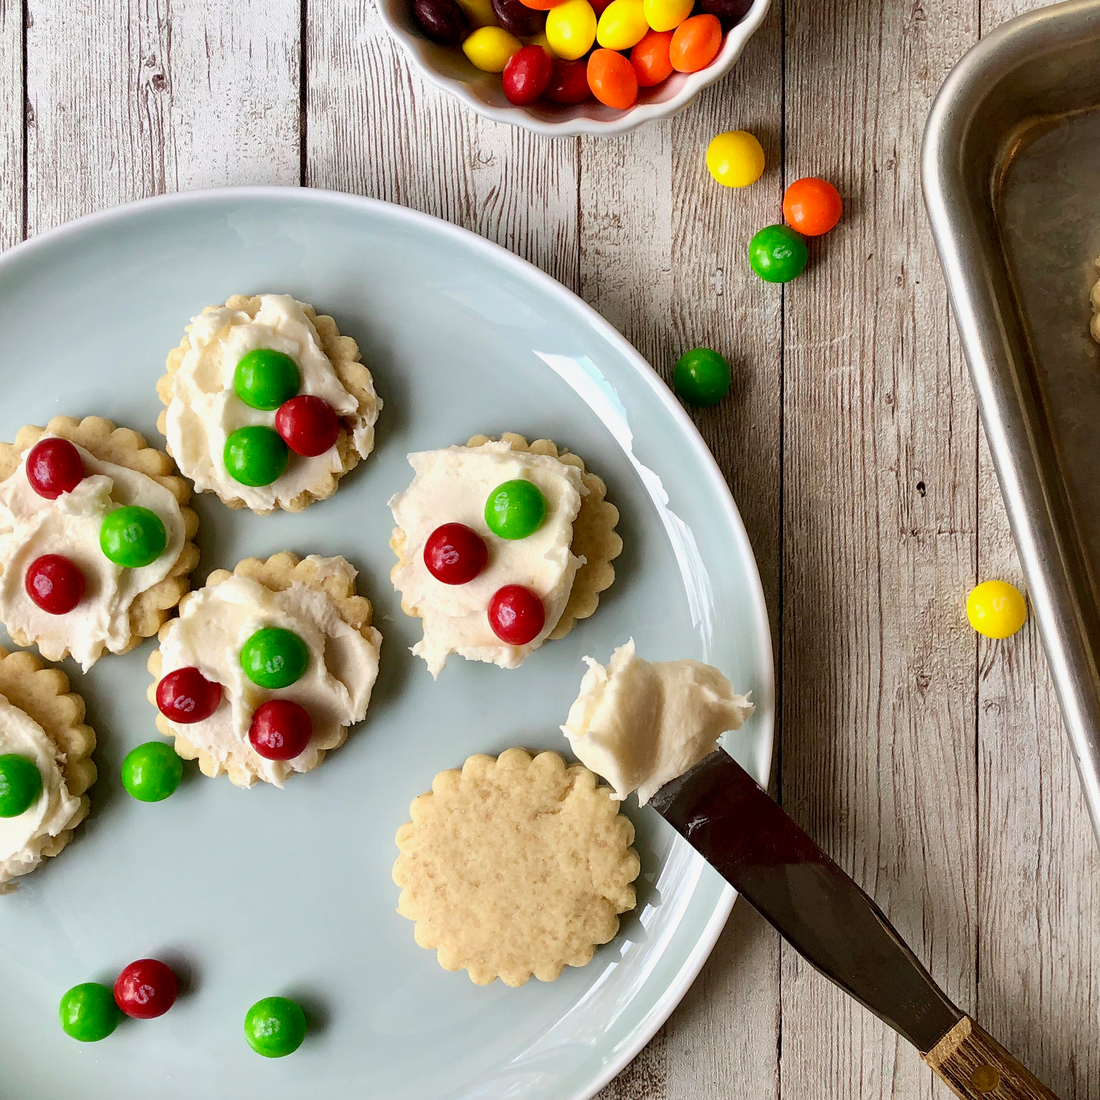 Cook with Catskill Animal Sanctuary: Vegan Frosted Skittles Cookies